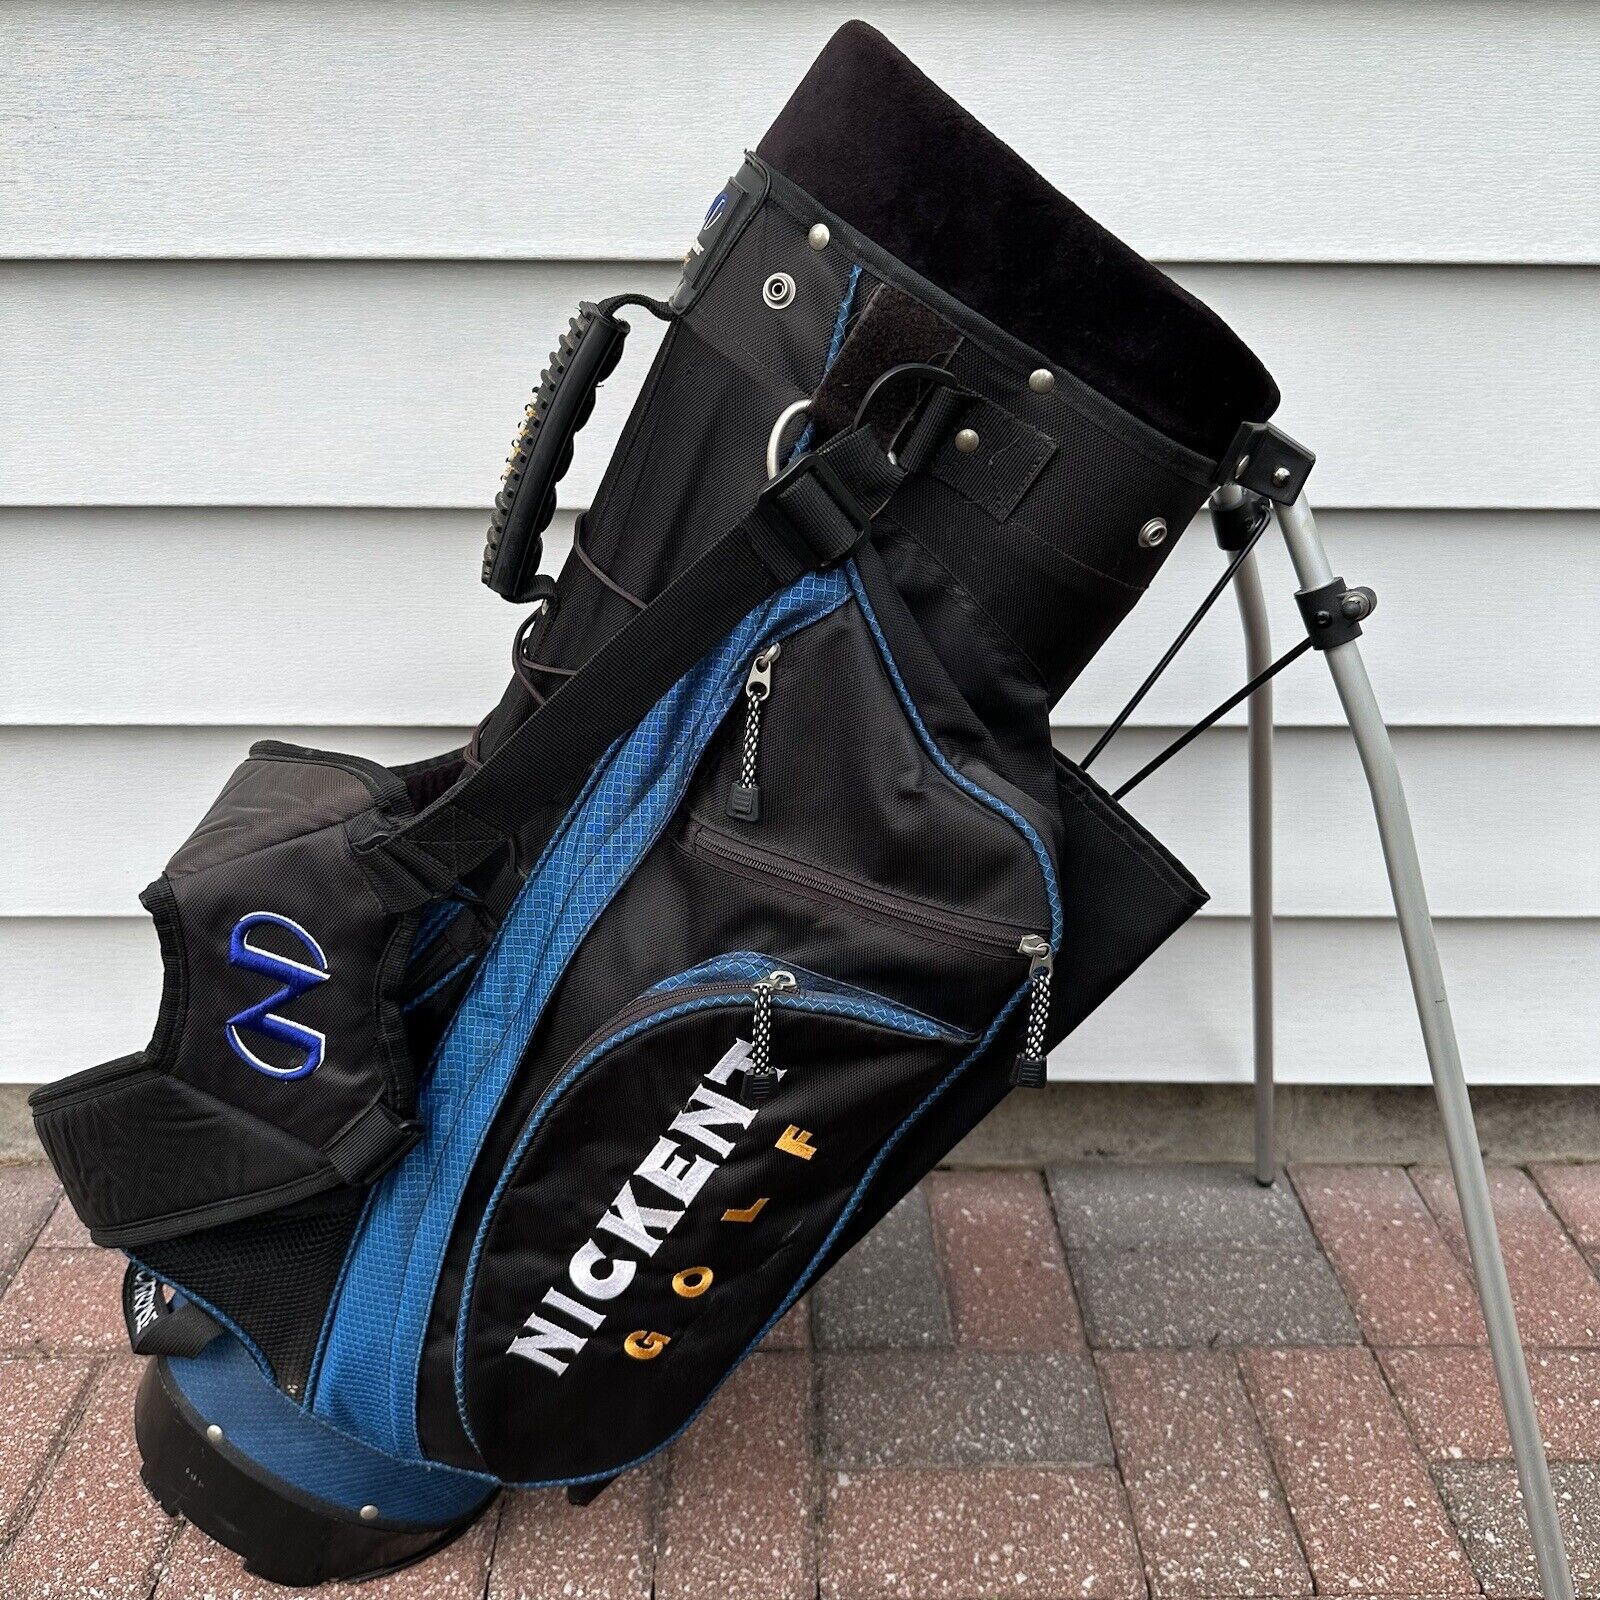 Nickent Golf Stand Carry Bag 4 Way Dividers Blue Black Logo With Rain Cover